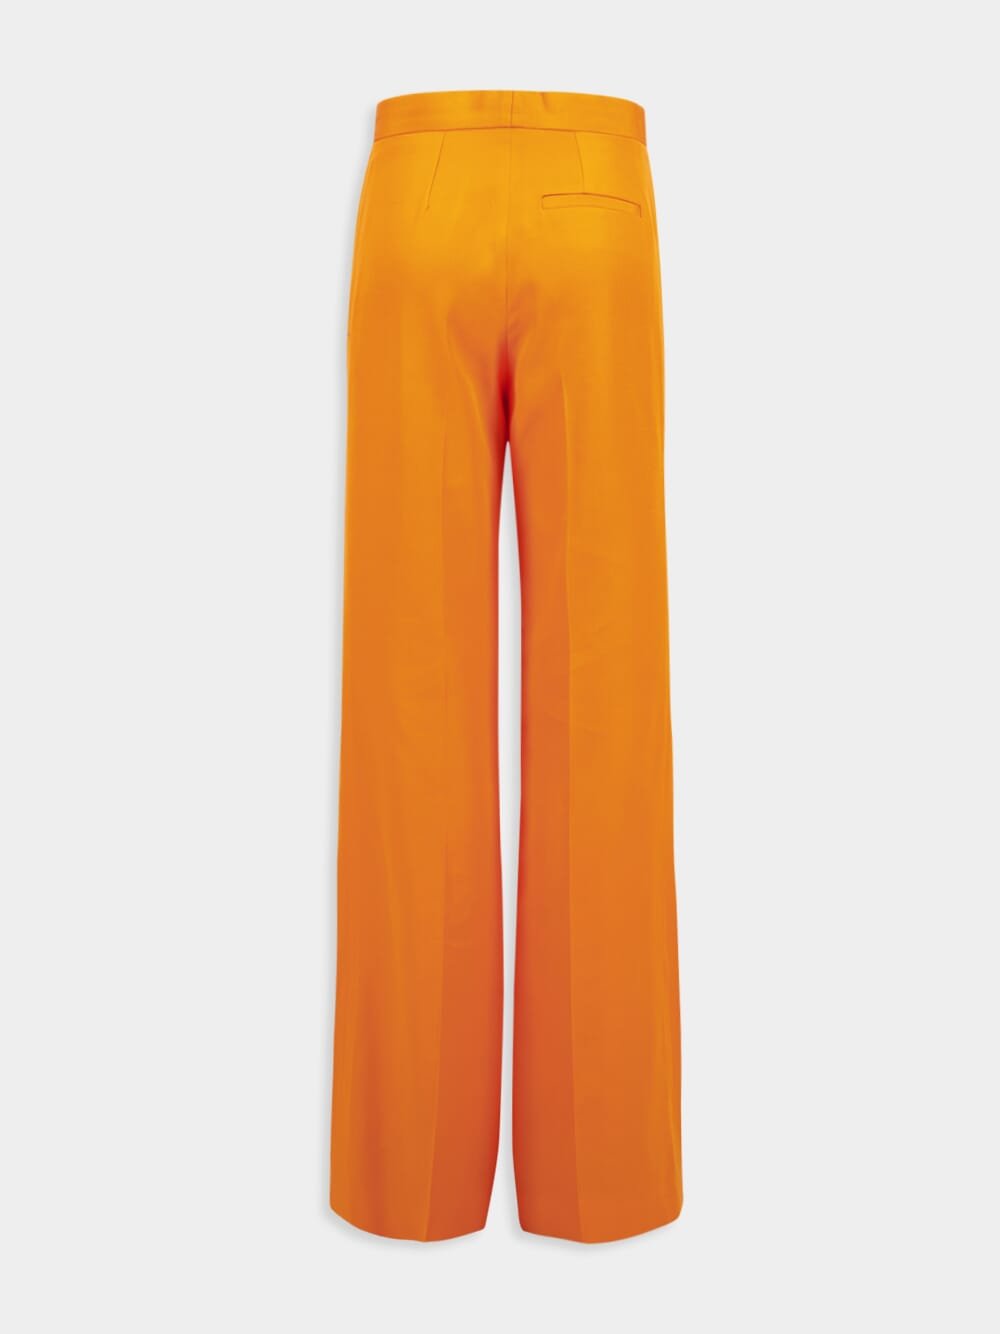 Stella McCartneyMid-Rise Flared Trousers at Fashion Clinic